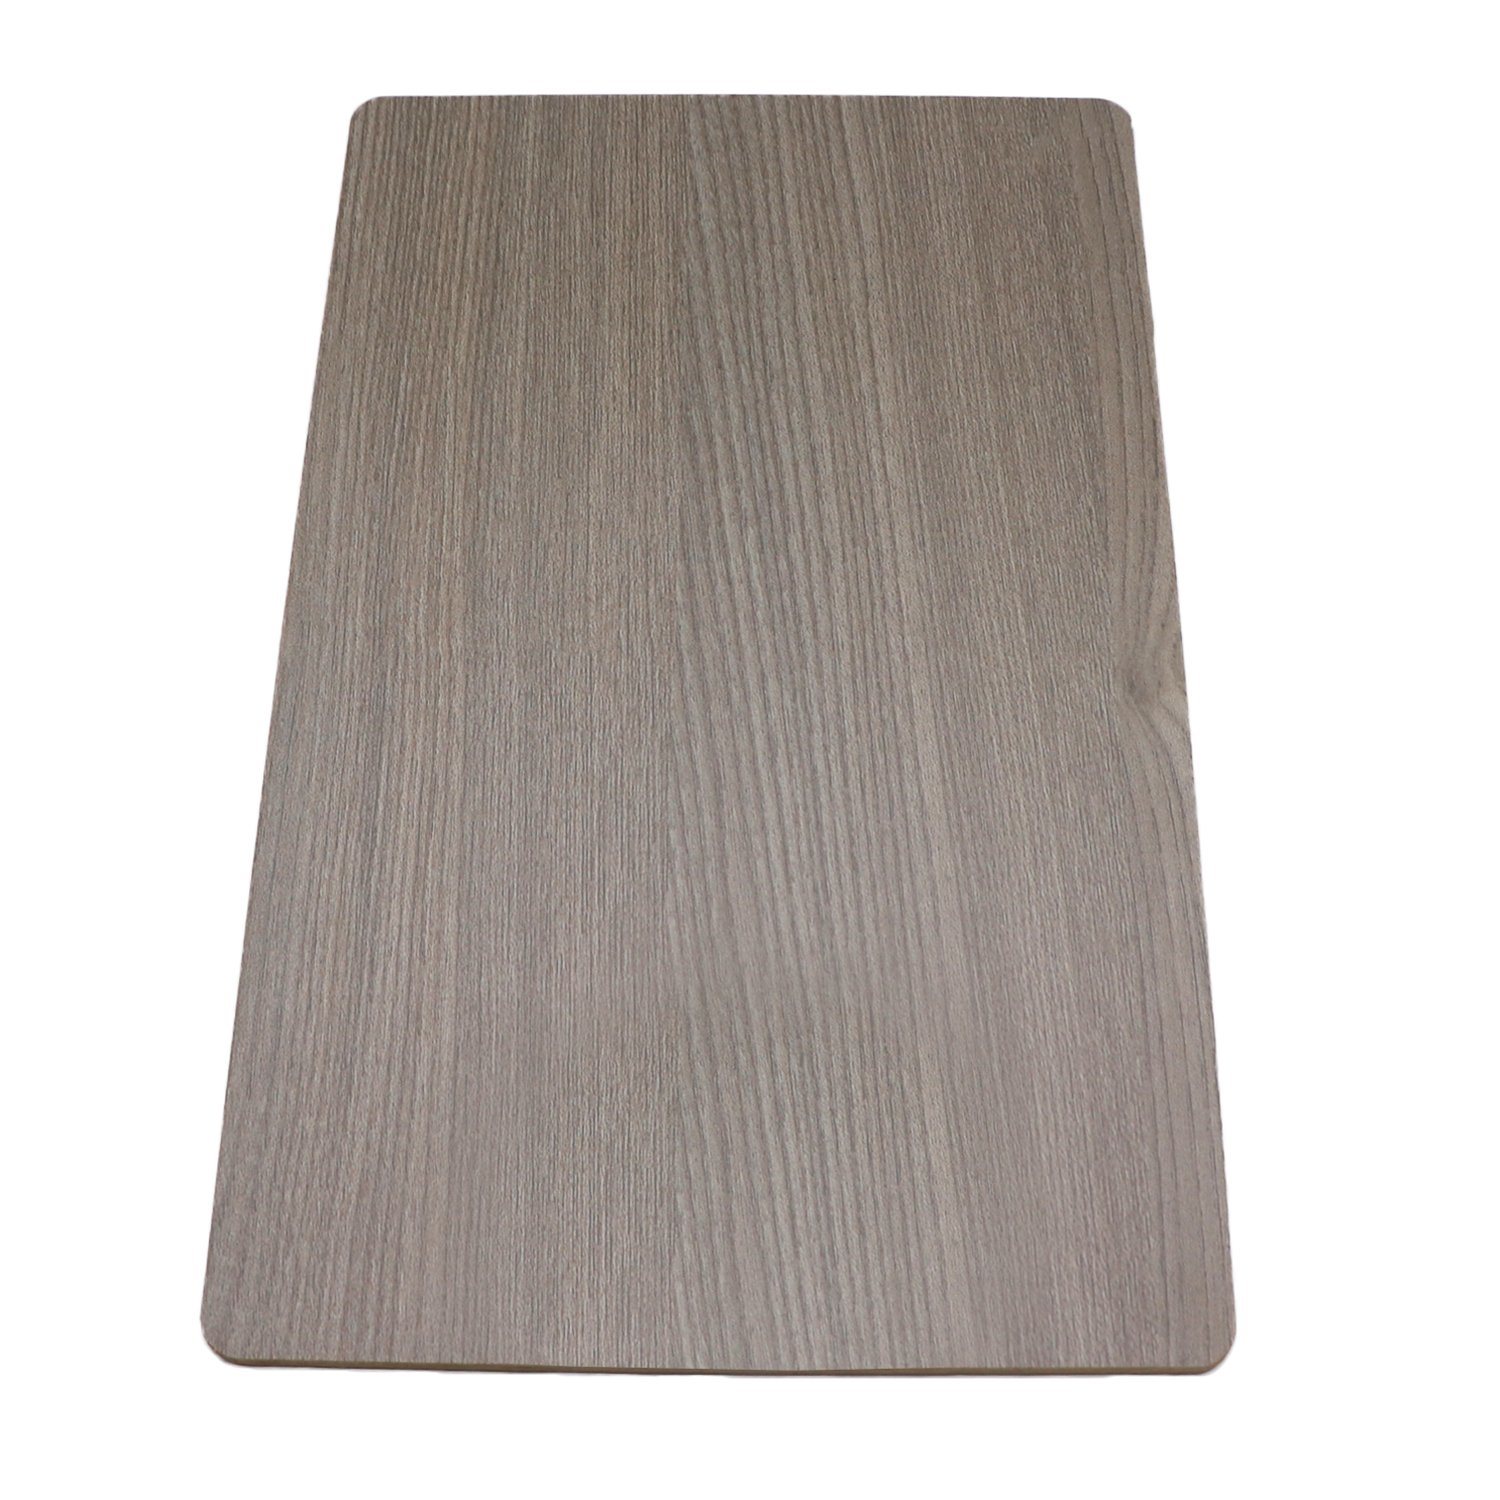 China Good Quality Melamine Film Faced Ply Wood Board Multi Wood Grain Plywood for Furniture